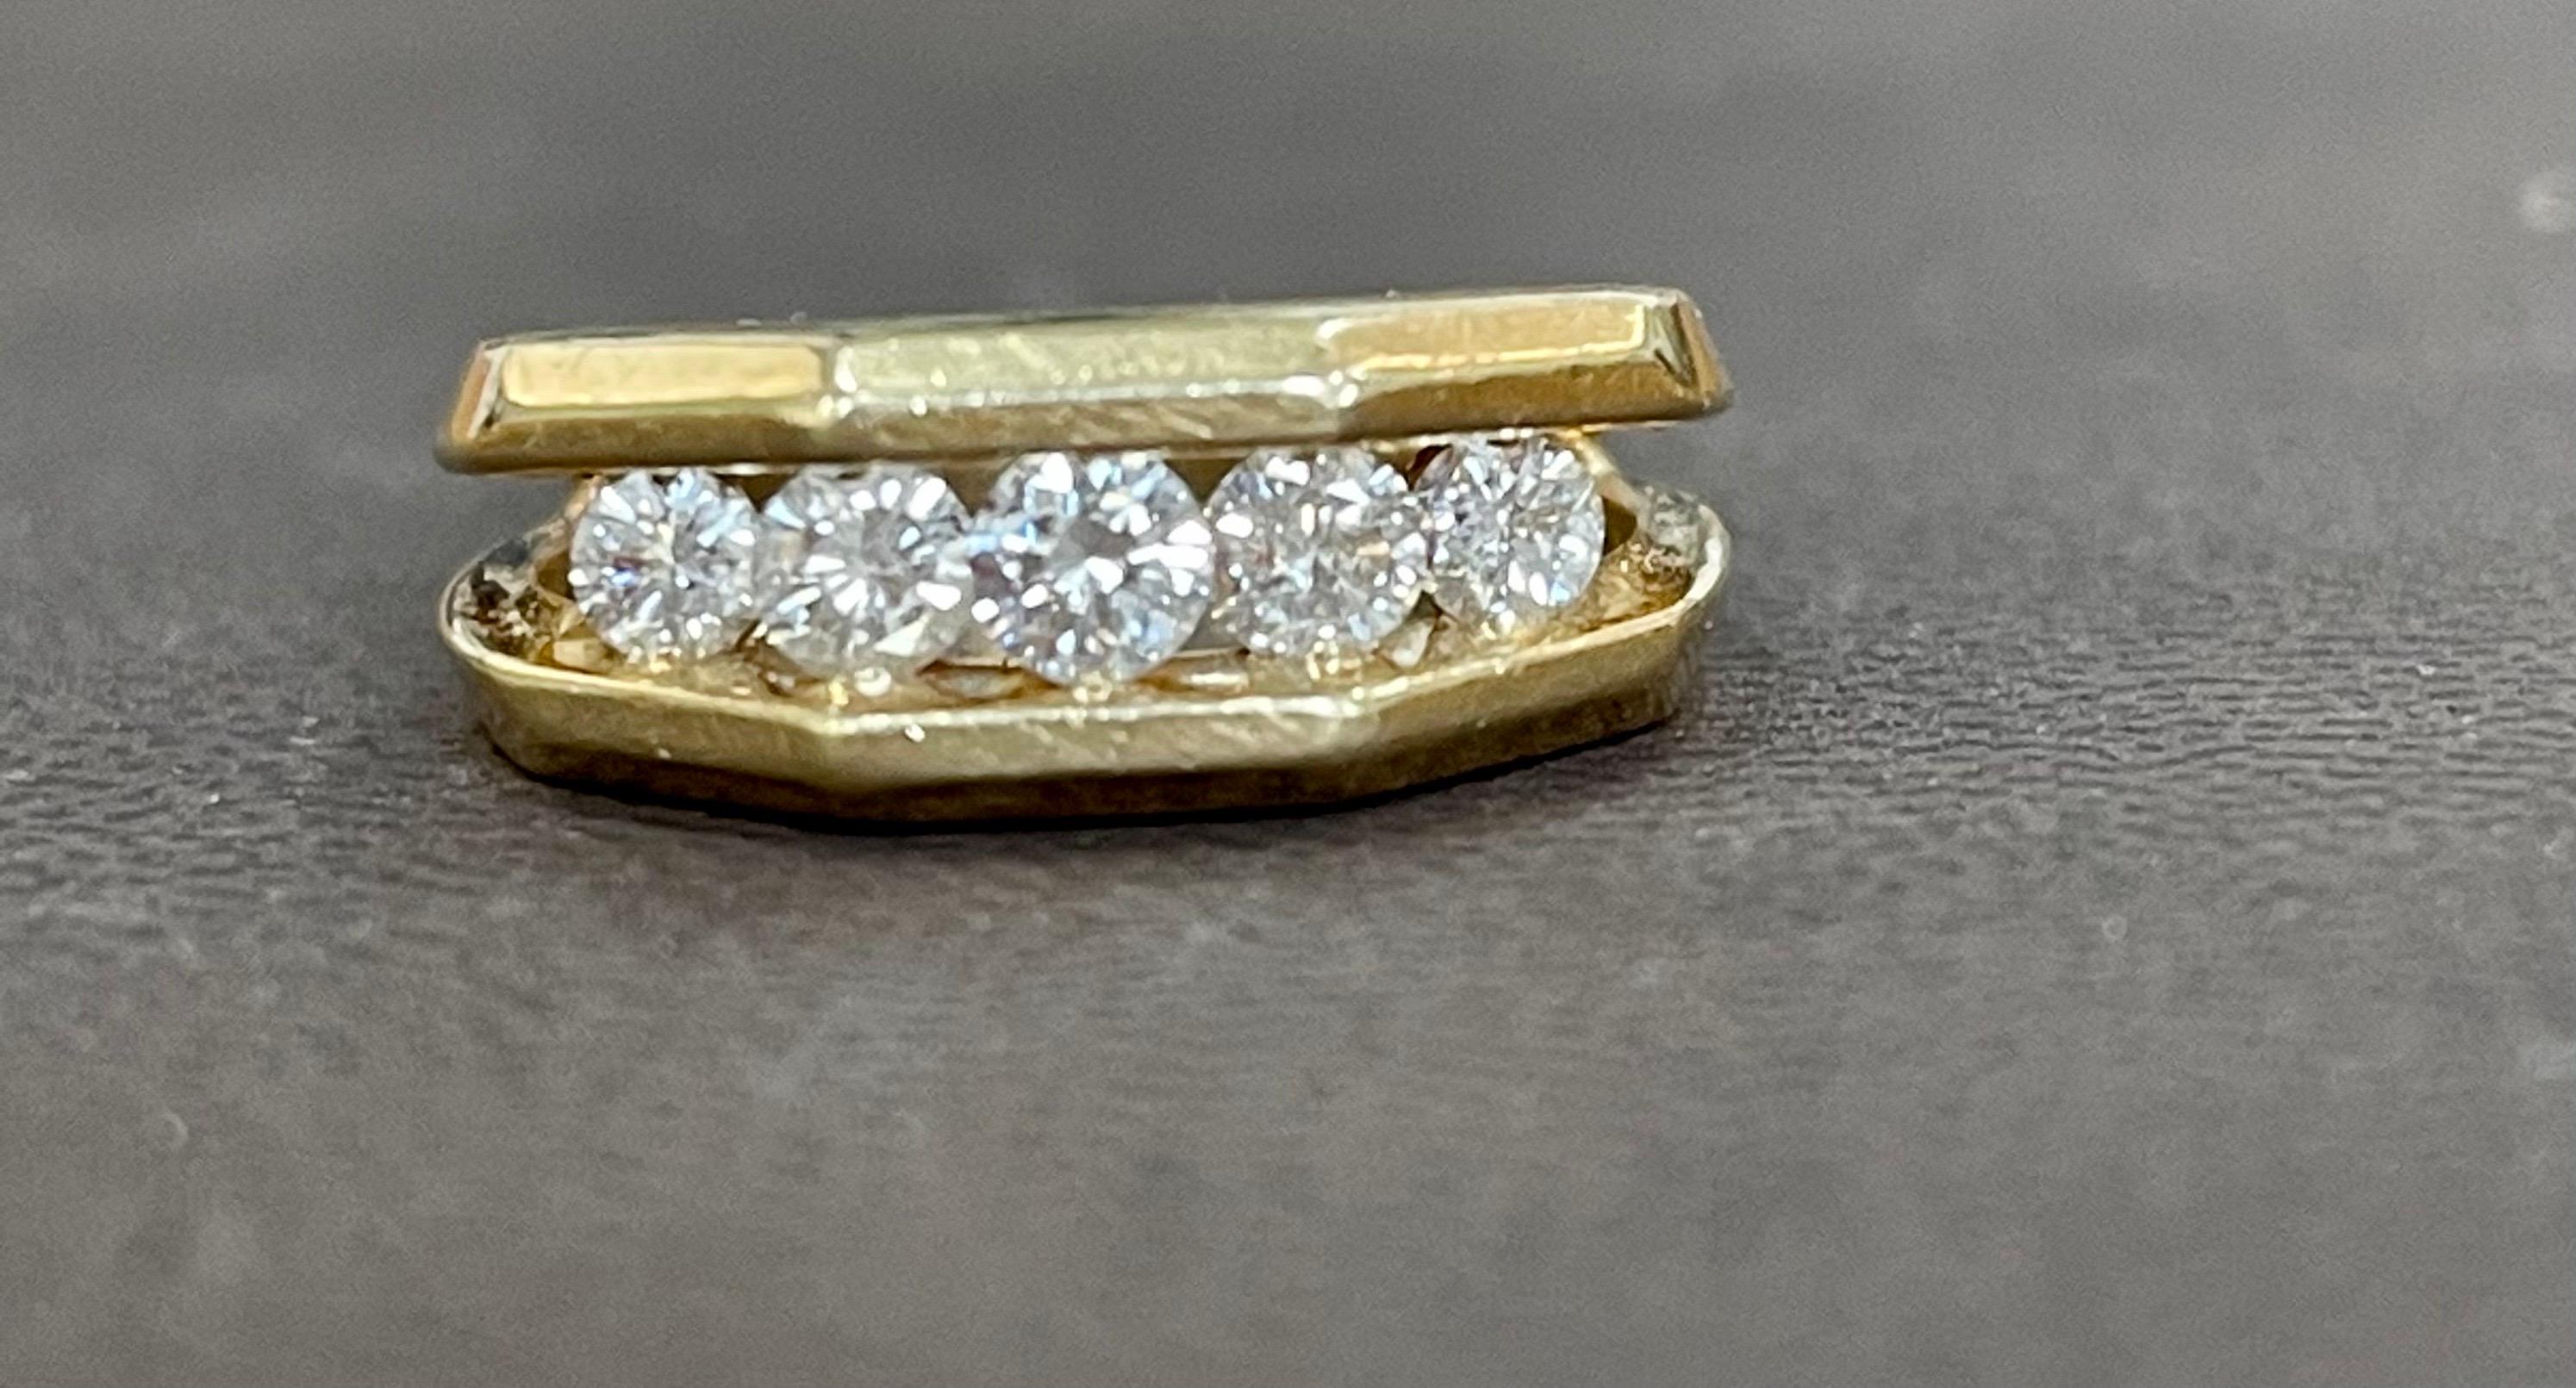 5 Diamonds Unisex 1-Row Diamond Yellow Gold Band Ring in 14 Karat Gold Size 7
This is a open setting or channel setting ring from our premium wedding collection.
5 round diamonds VS quality are set in a row in 14 karat yellow gold .
Ring size 7, it